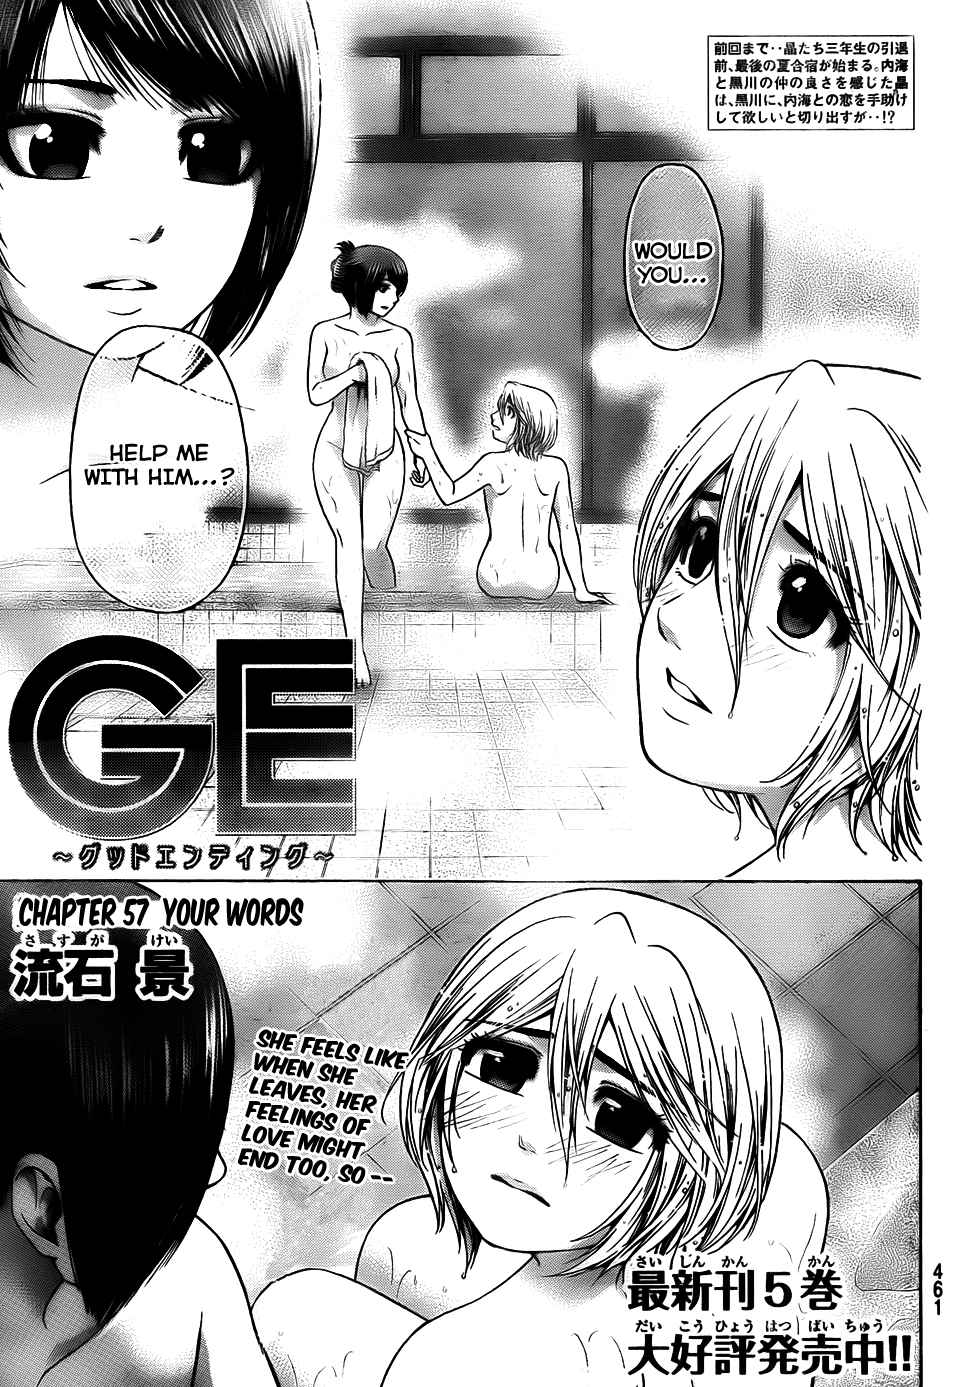 GE ~Good Ending~ Vol. 6 Ch. 57 Your Words